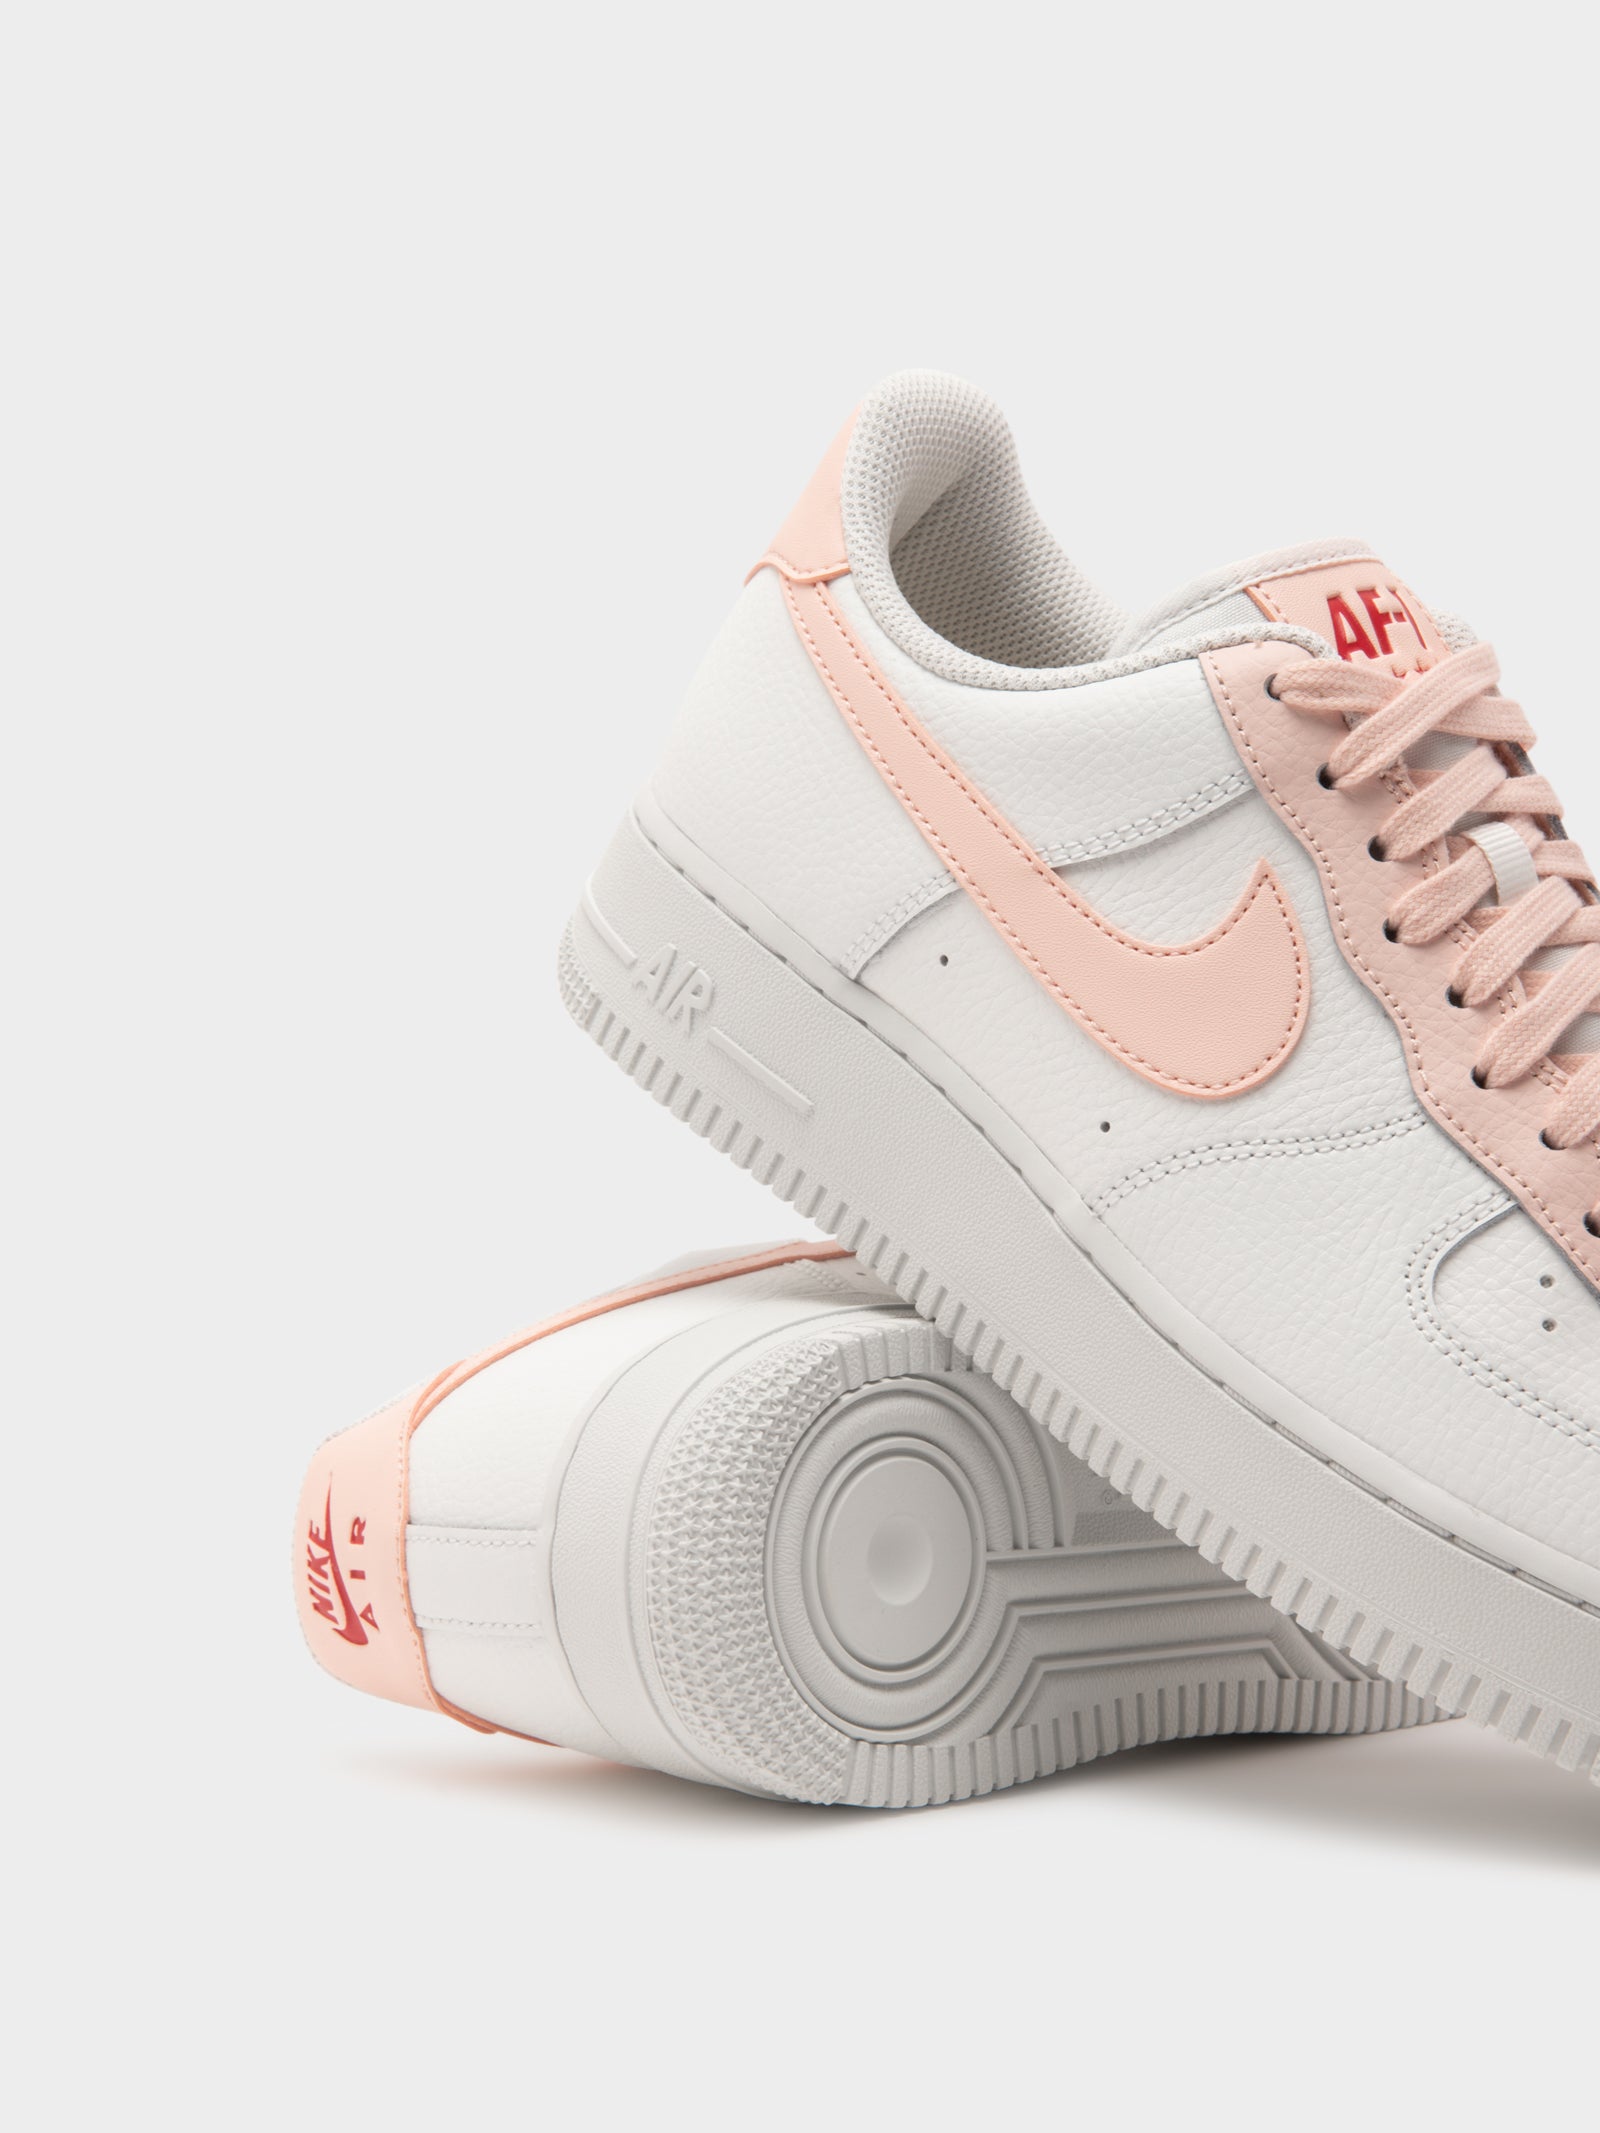 Womens Nike Air Force 1 07 in Summit White & Pale Coral